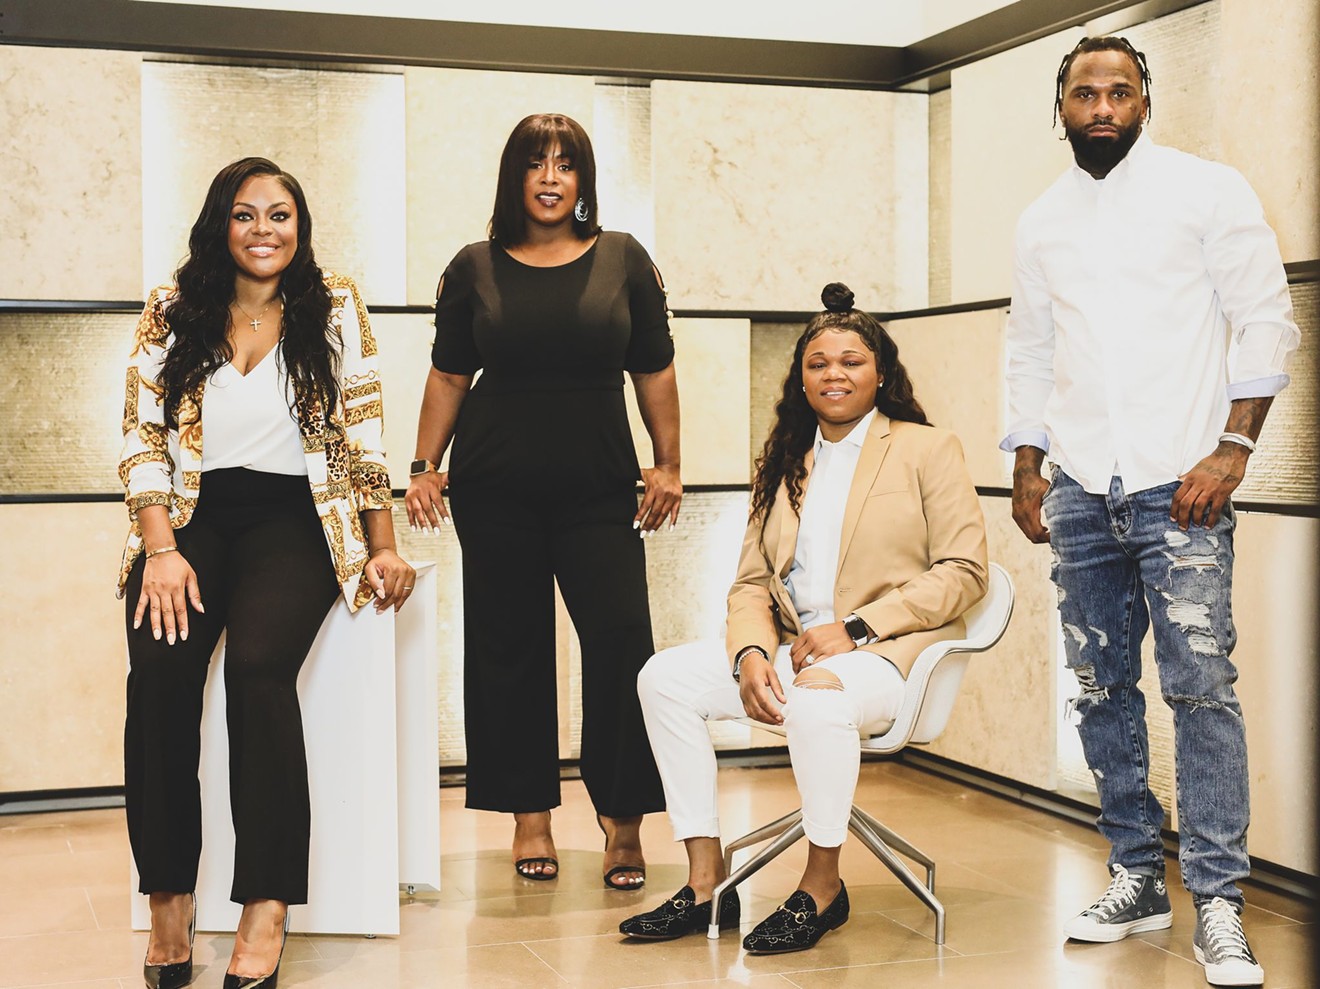 The AXIS crew, left to right: Dominique Simpson, publicist; Mechelle Tucker, co-founder; Ja-nice Johnson, CEO; and Brandon Wells, partner.